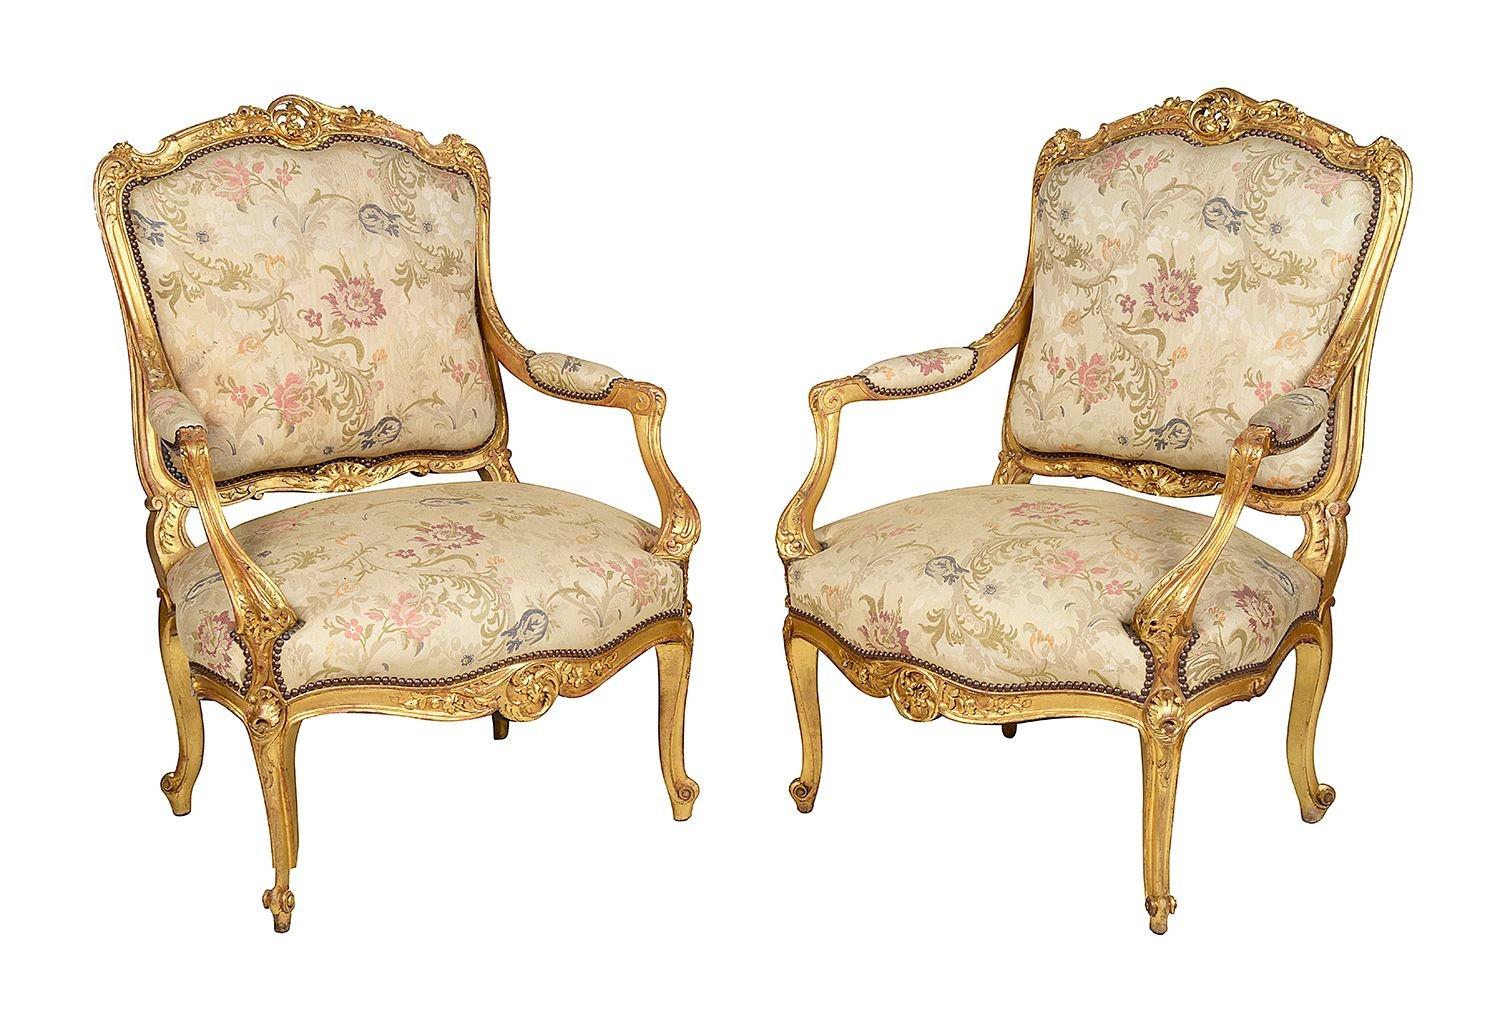 A good quality late 19th century French carved gilt wood Salon suite, conceding of a pair of arm chairs and matching sofa. The gilded show-wood having classical scrolling floral decoration and raised on elegant cabriole legs. The classical tapestry